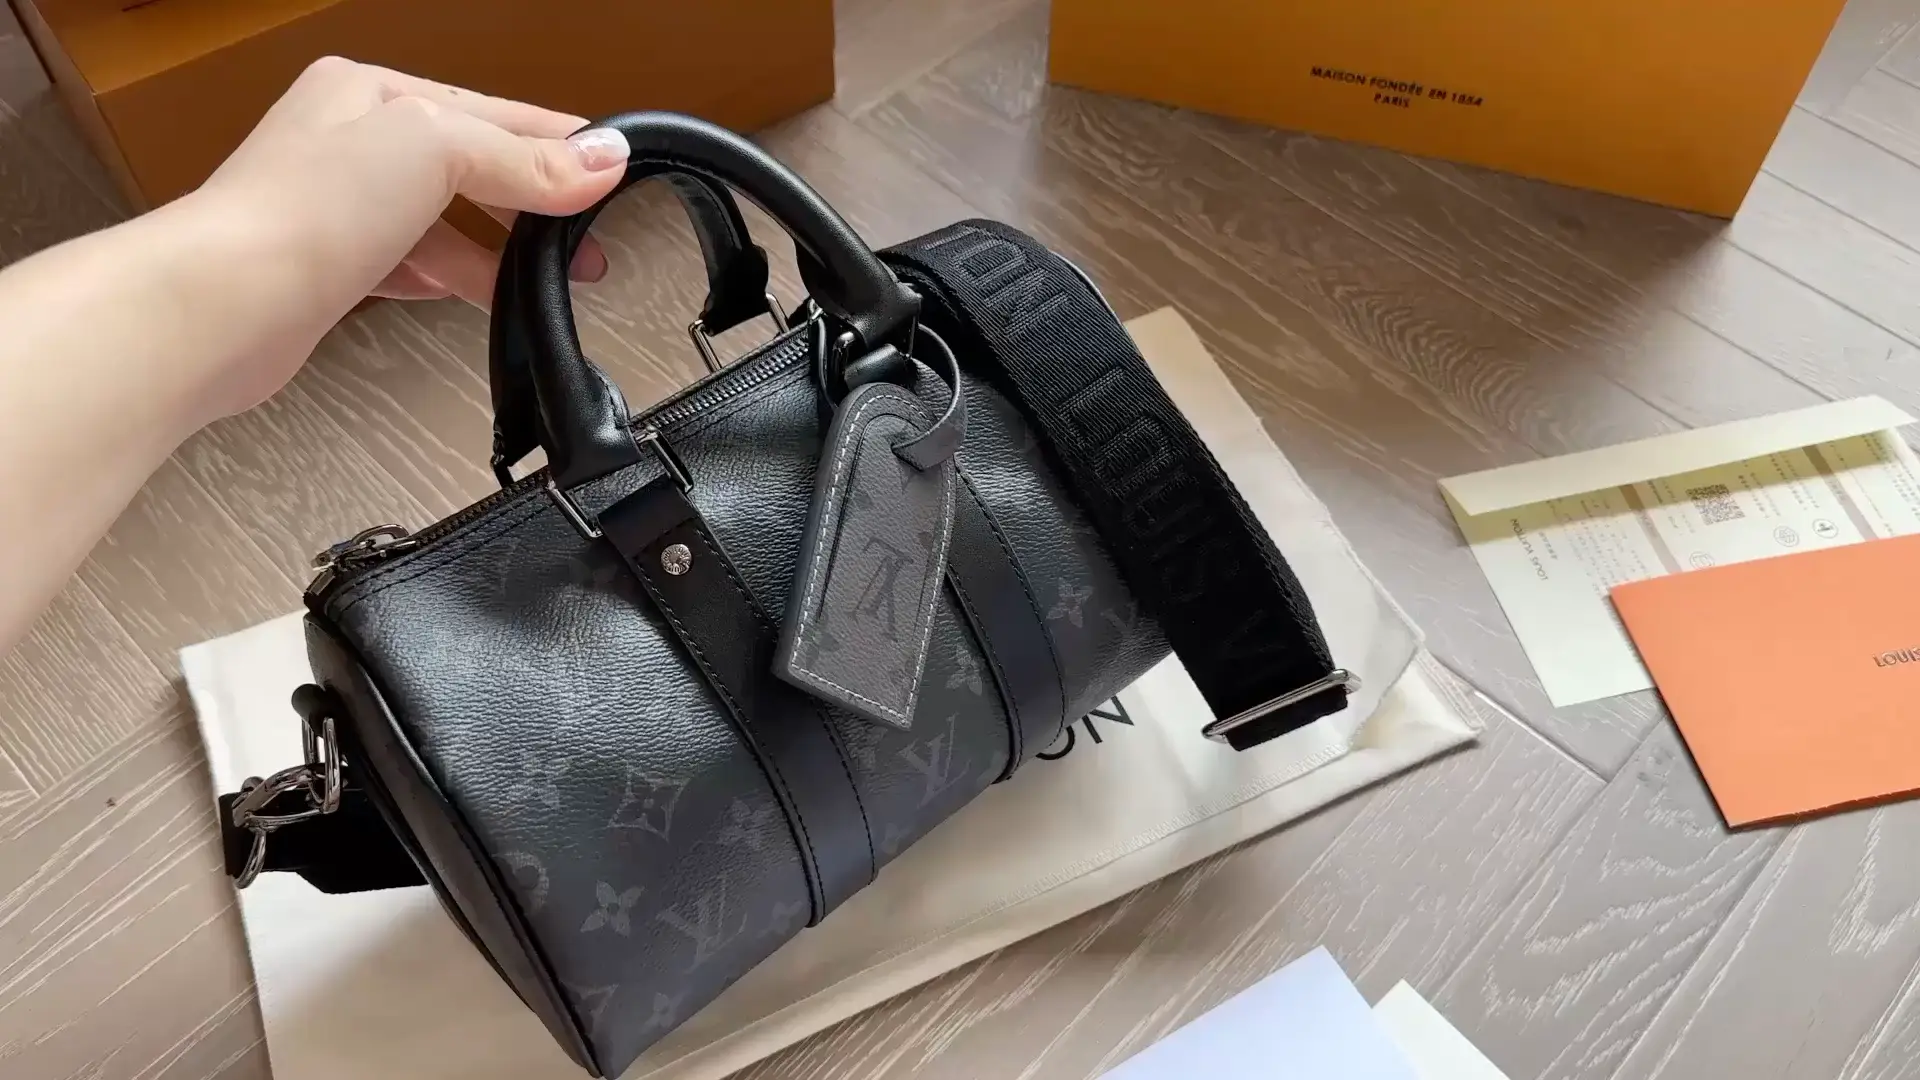 Unboxing my @Louis Vuitton Easy Pouch on Strap. #unboxing